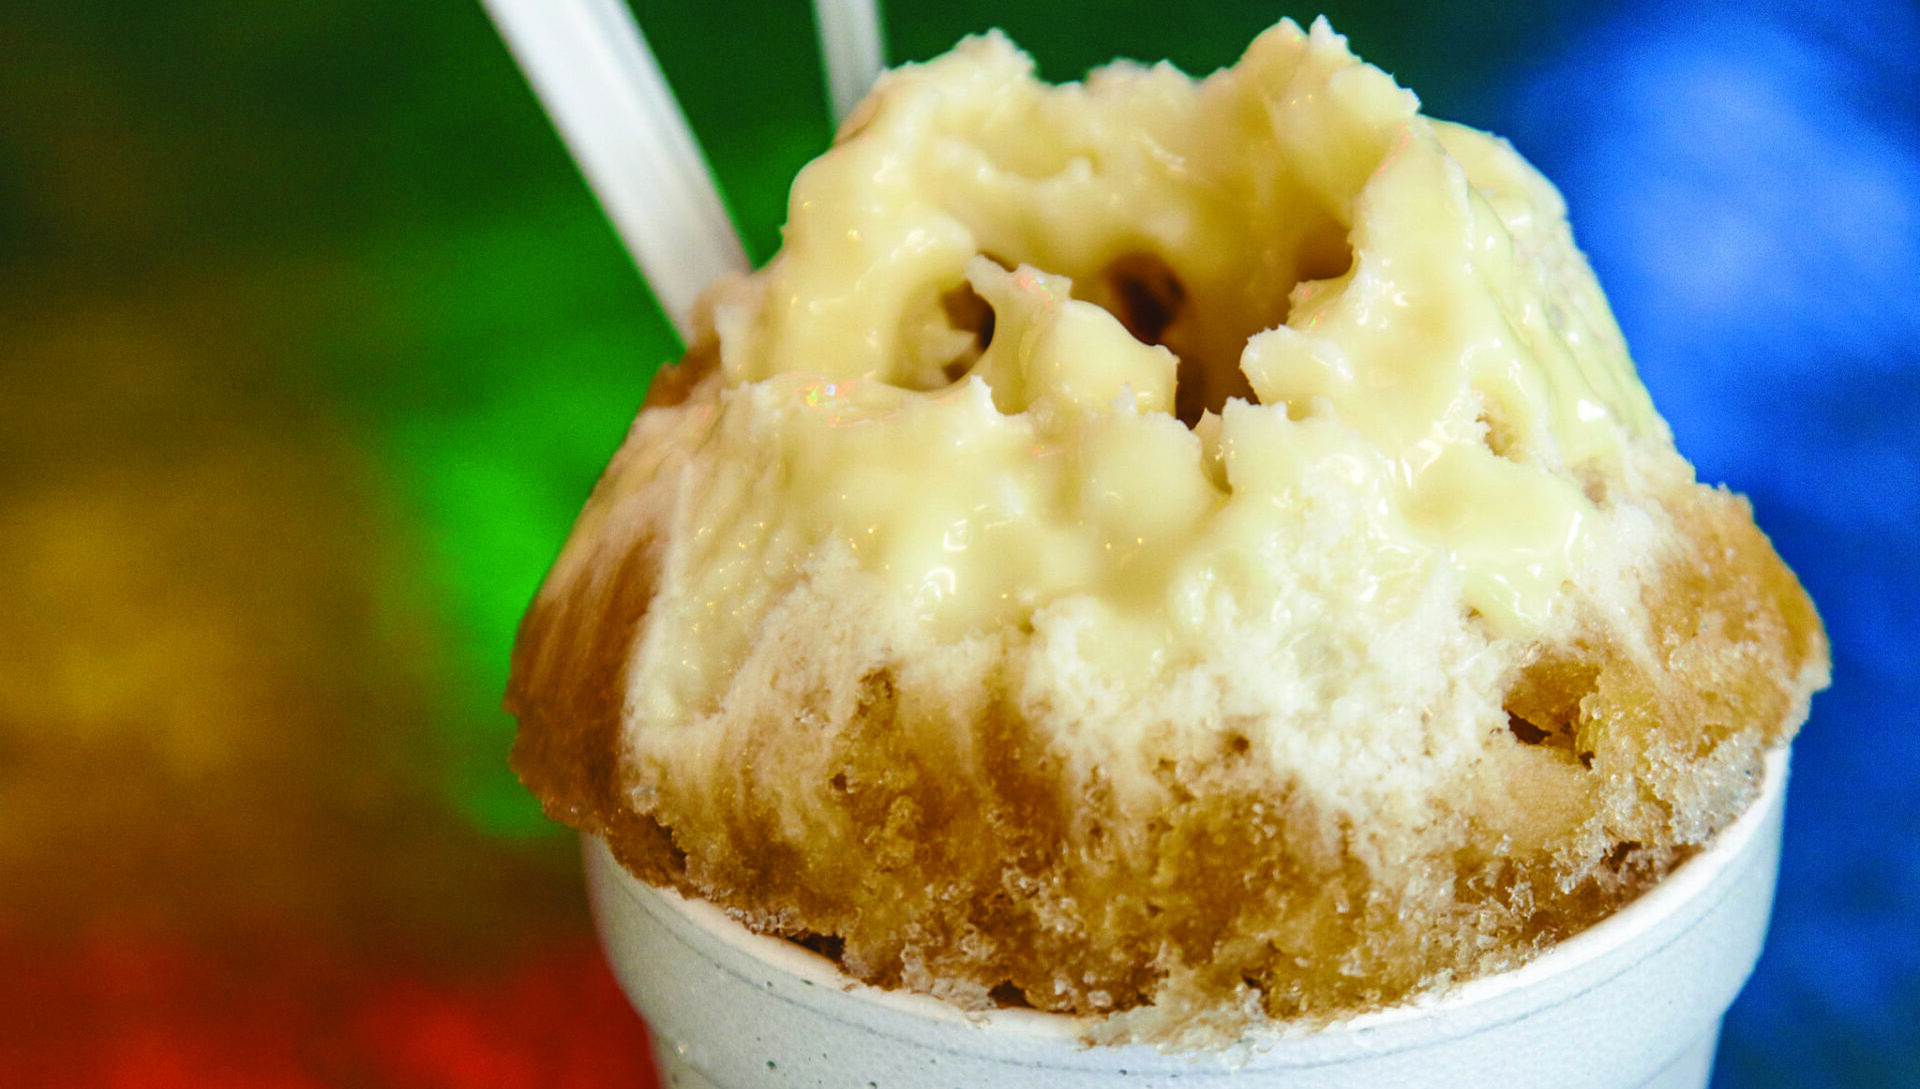 Cafe au Lait Sno Ball at Sal's Sno Balls in Old Metairie